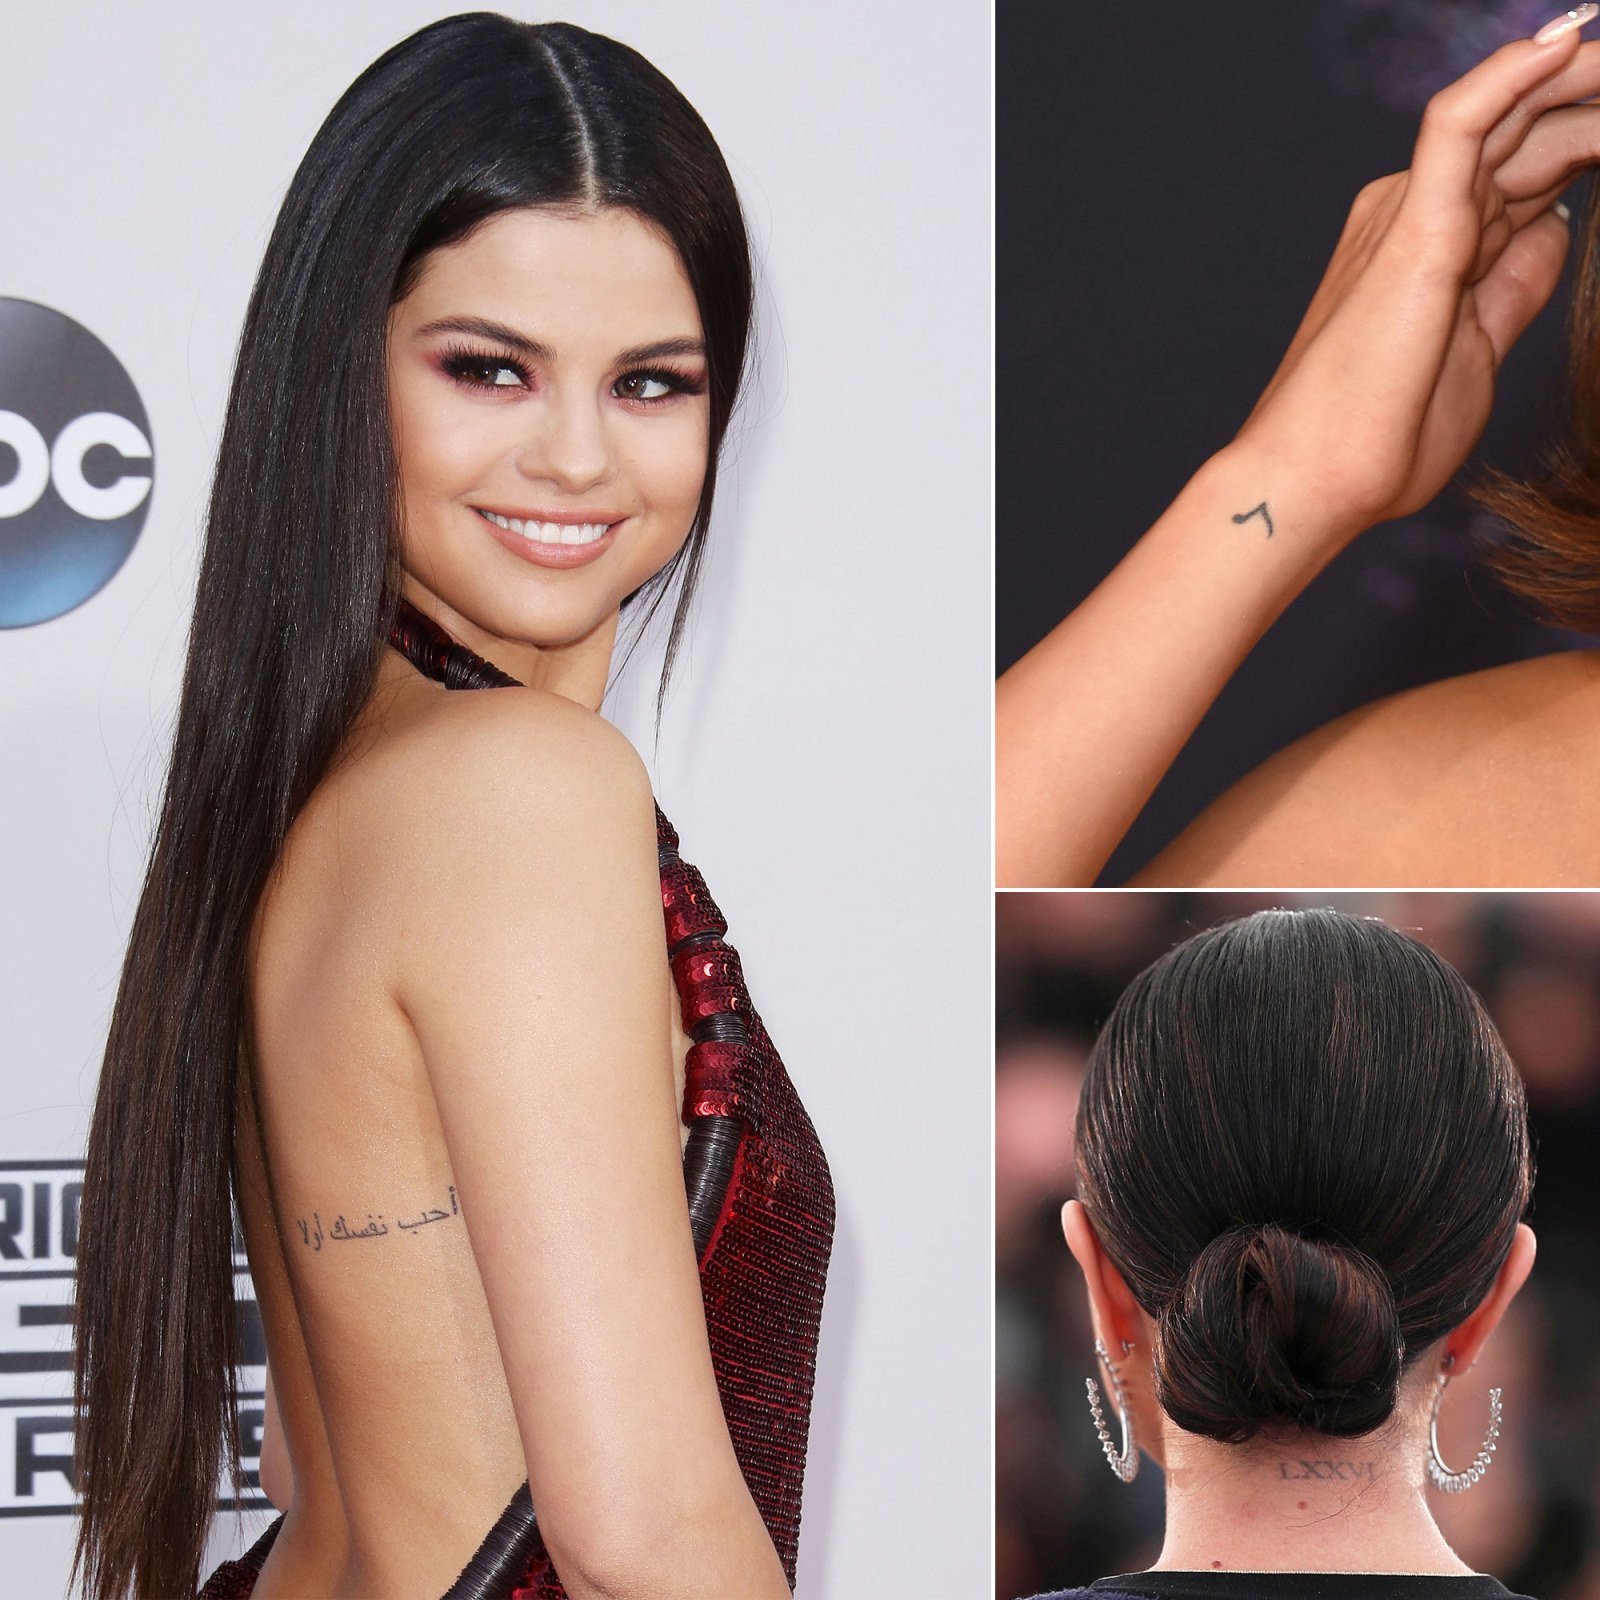 Selena Gomez Tattoos: Details and Meanings Explained